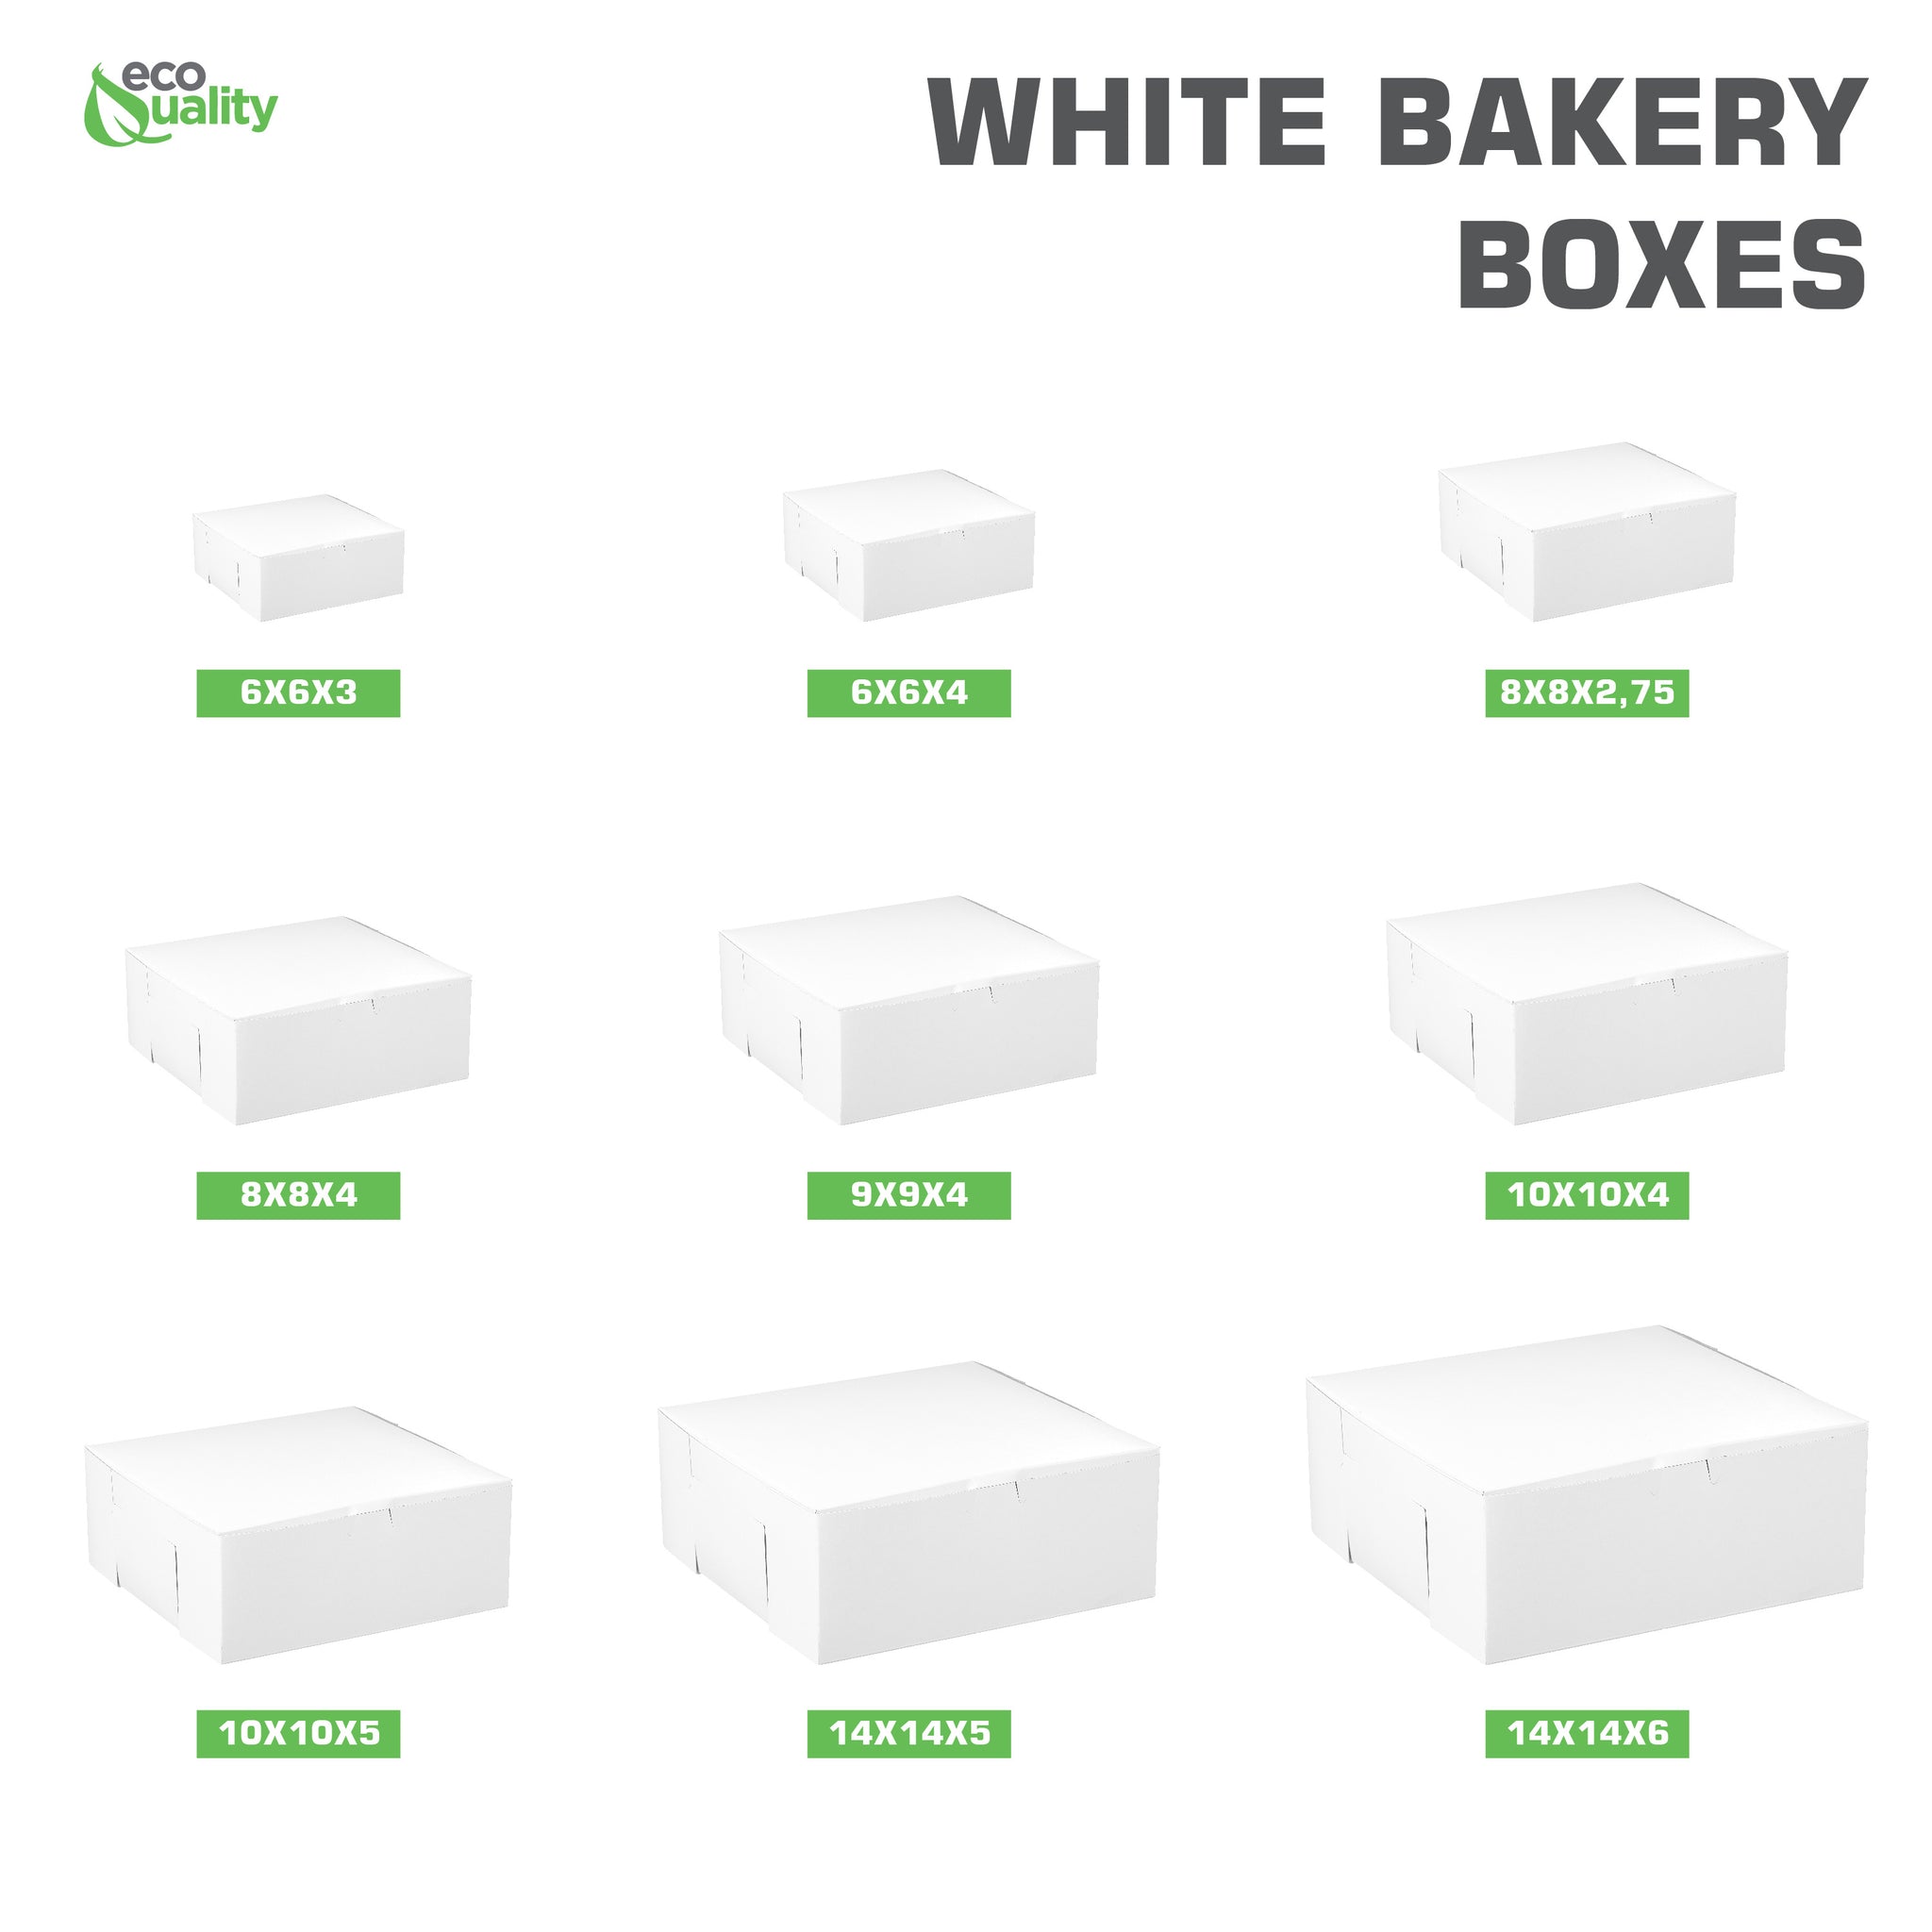 White Kraft Paperboard for Home or Retail  White Bakery Pastry Boxes  Restaurant Food Trucks Caterers take out sustainable  Recyclable for Pastries  Pies  Paper Cardboard  Gift Box  Ecofriendly  Cookies  Catering Restaurant Cafe Buffet Event Party  Cakes  Baby Shower  affordable bulk economical commercial wholesale  8 x 8 x 4 Inches